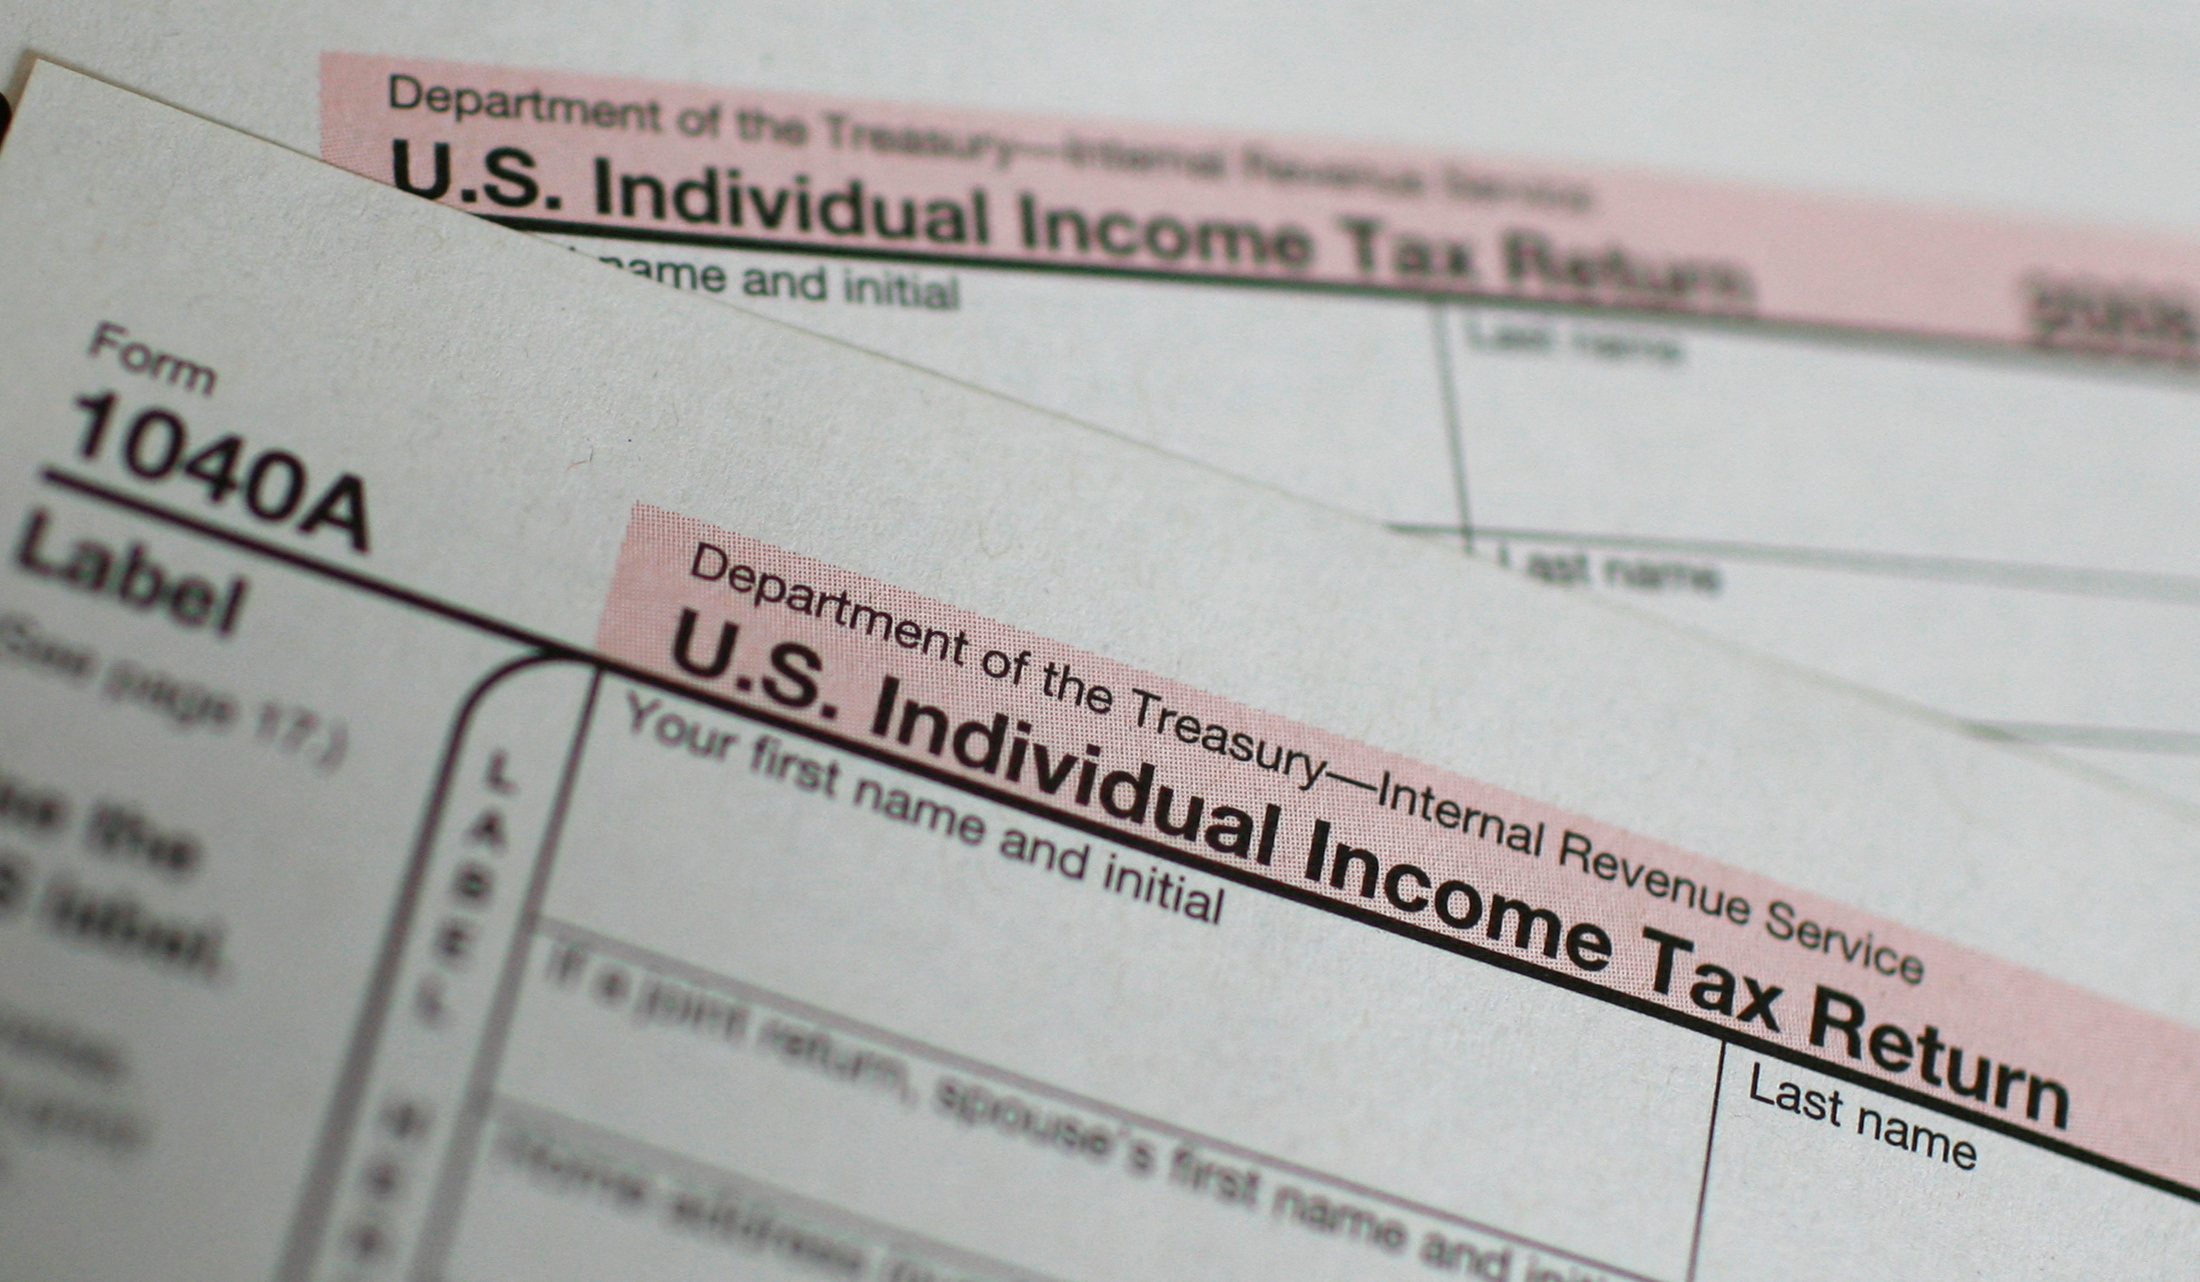 U.S. 1040A Individual Income Tax form is seen at a U.S. Post office in New York